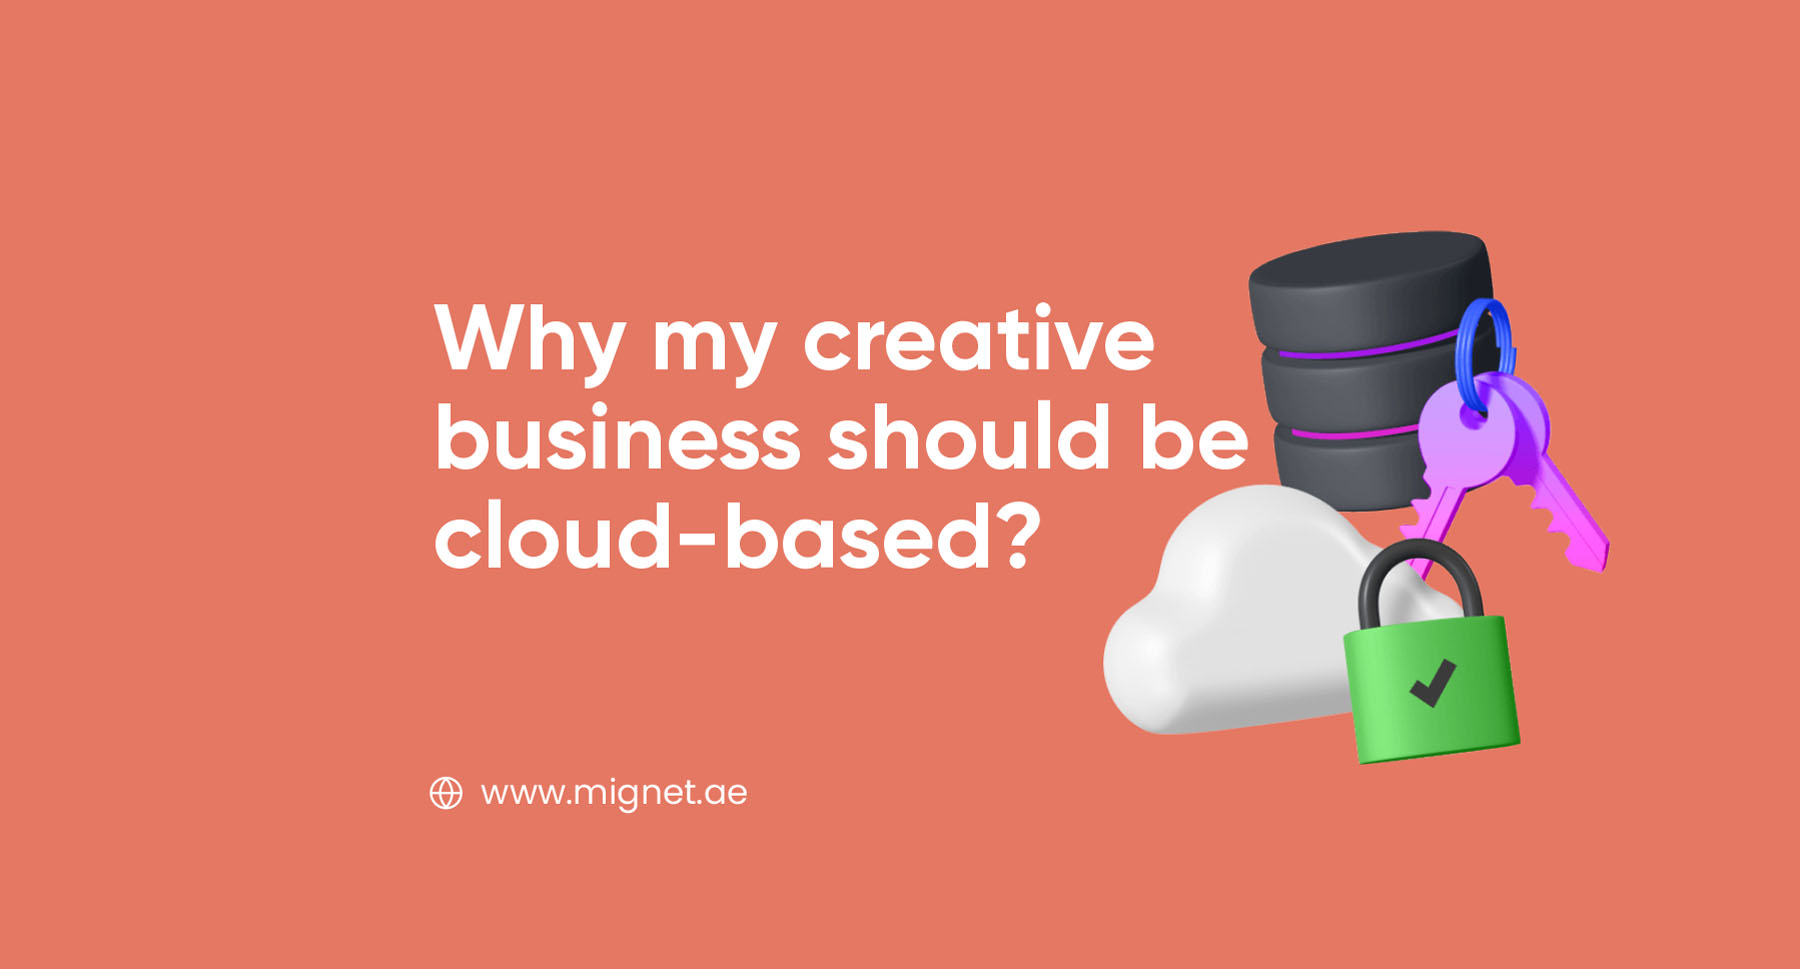 Why my creative business should be cloud-based?